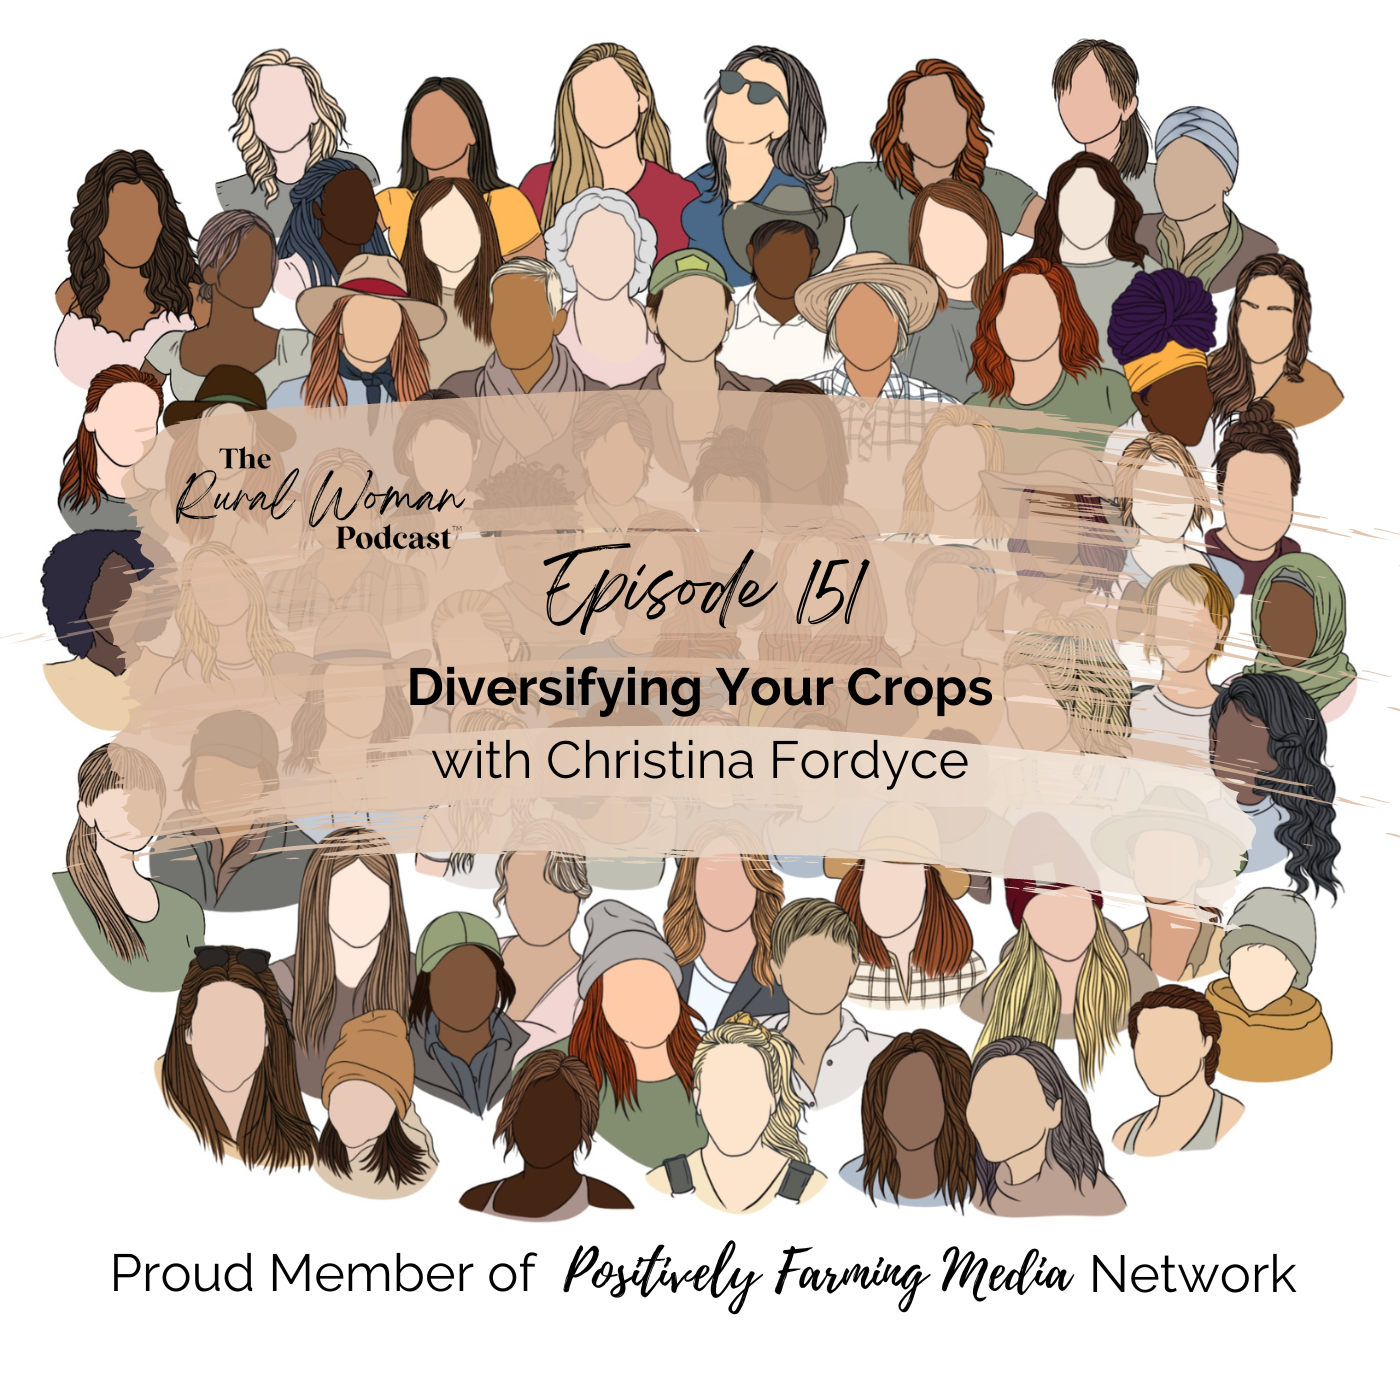 Diversifying your crops with Christina Fordyce